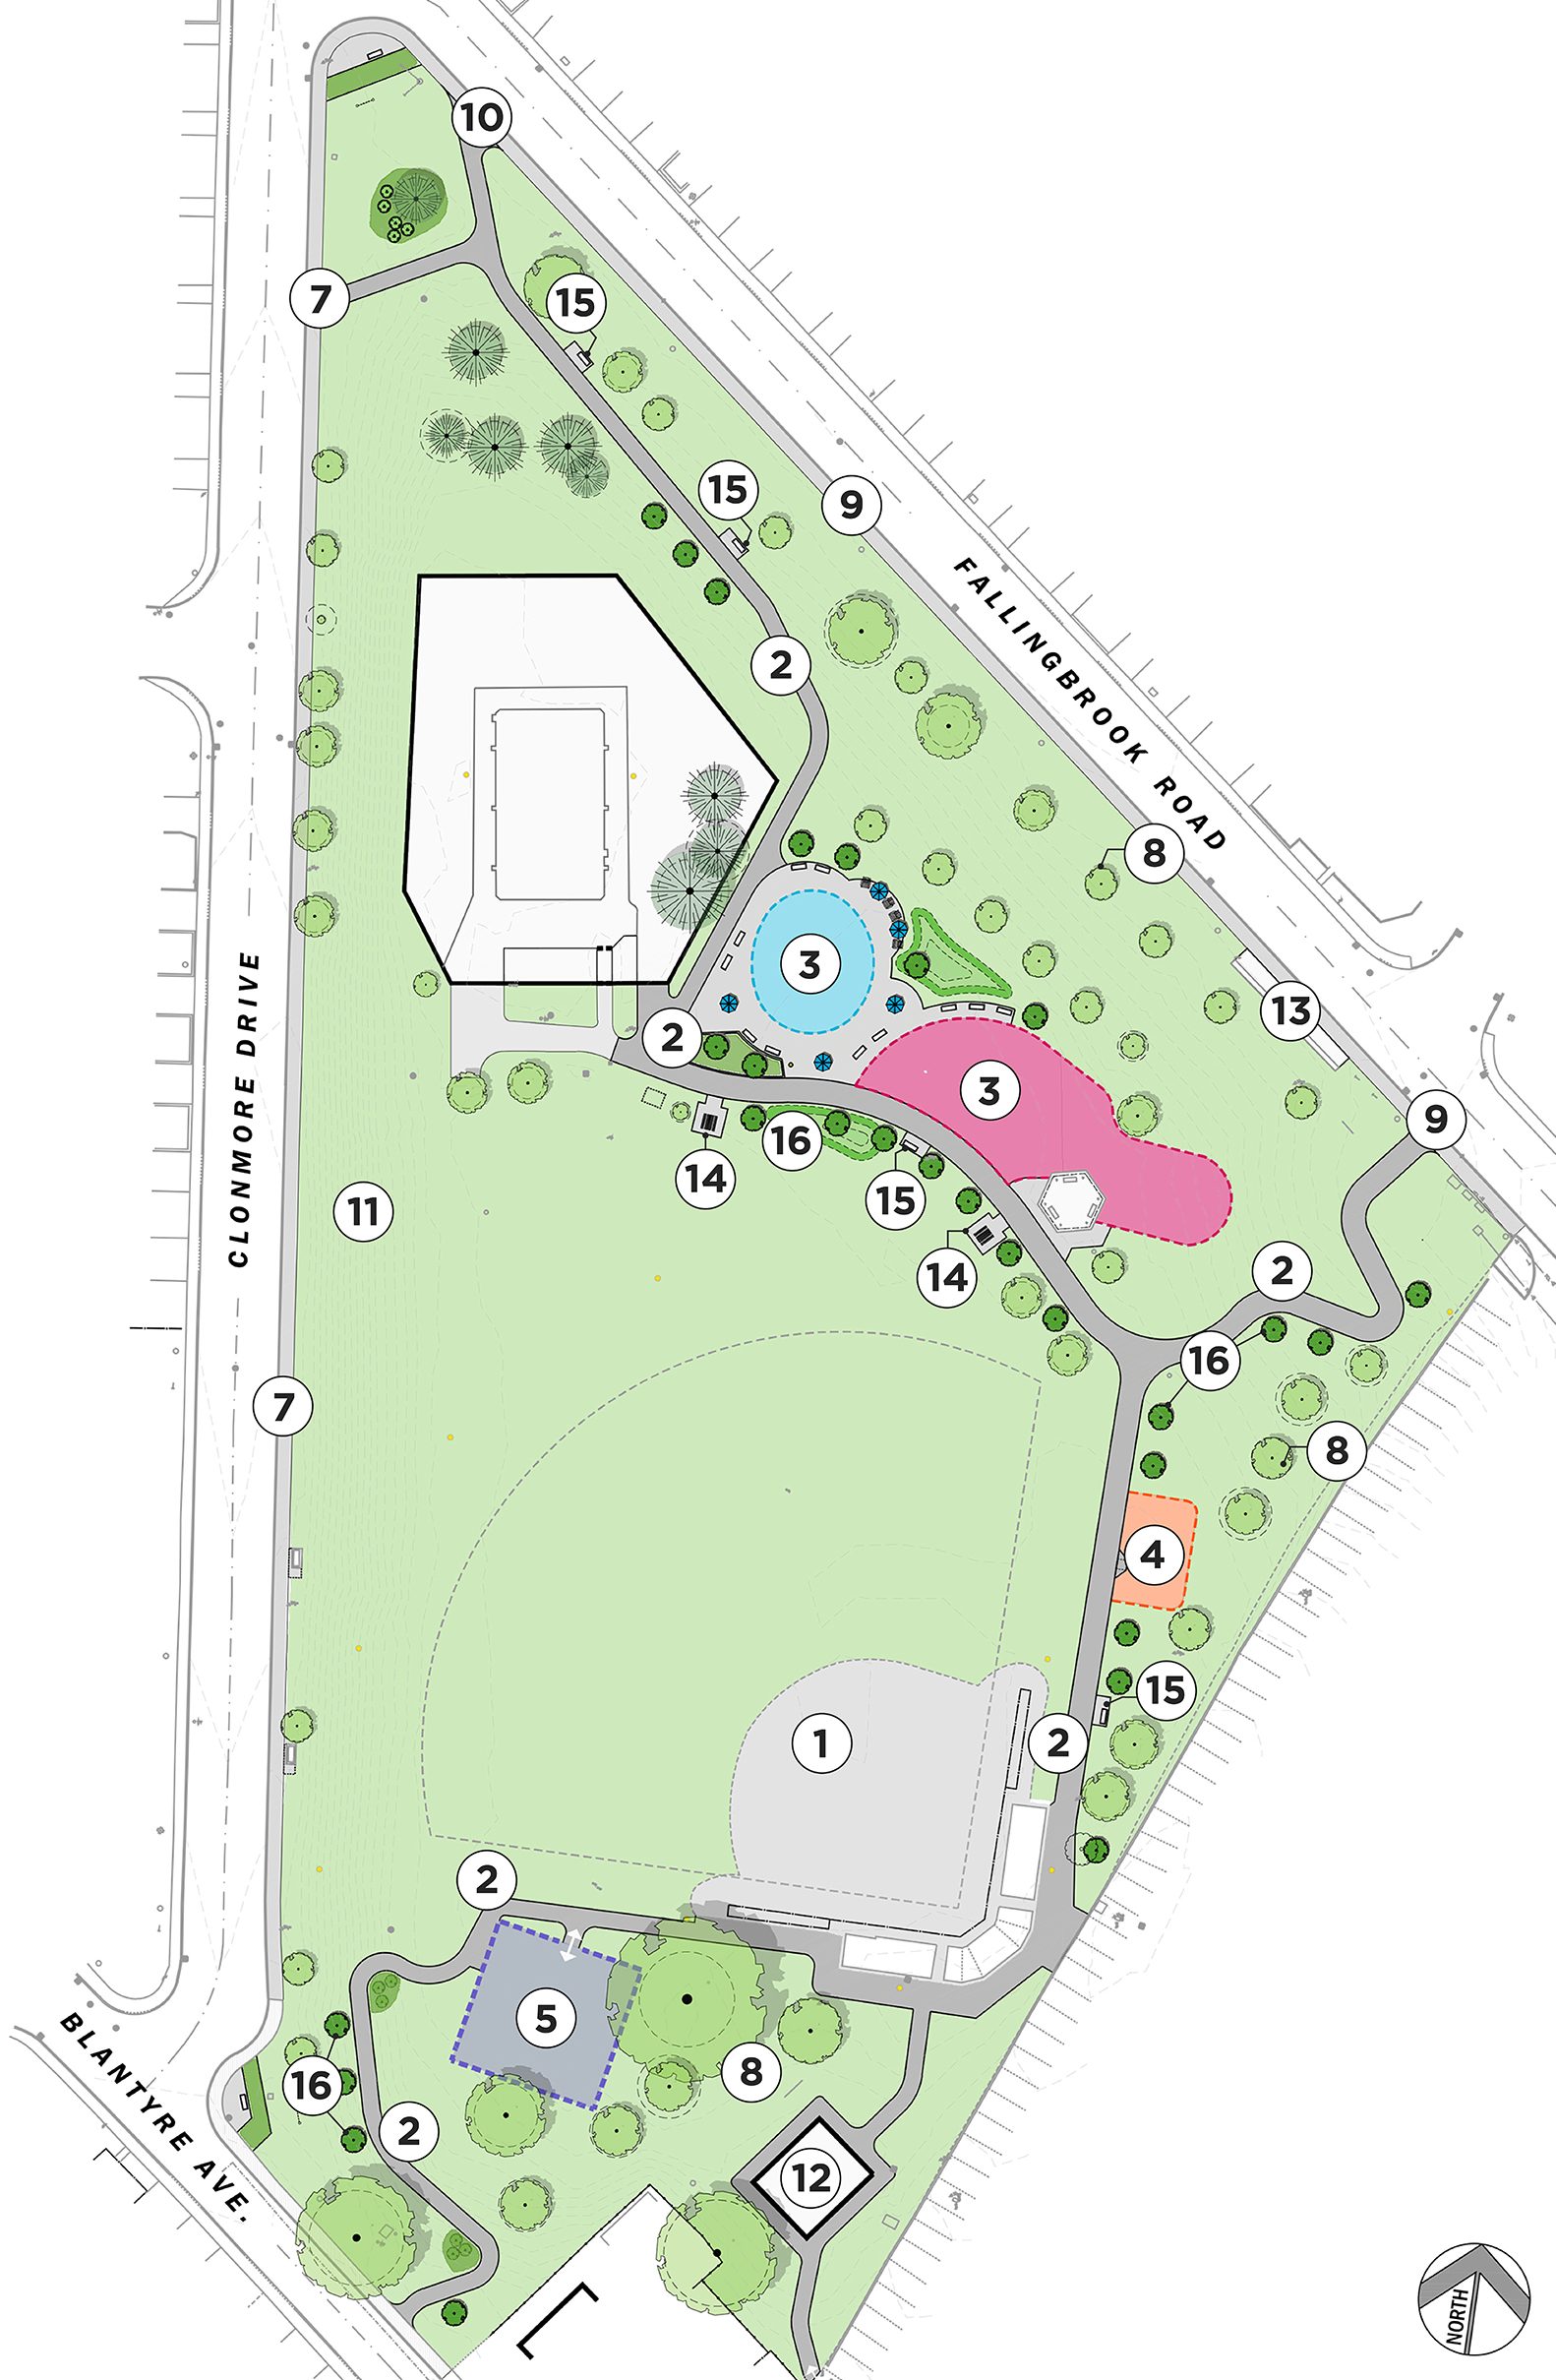 Preferred design for Blantyre Park showing proposed improvements throughout the park including new asphalt pathways, sidewalks at Clonmore Drive and Fallingbrook Road, splash pad, playground, seating areas, adult fitness area and tree planting.